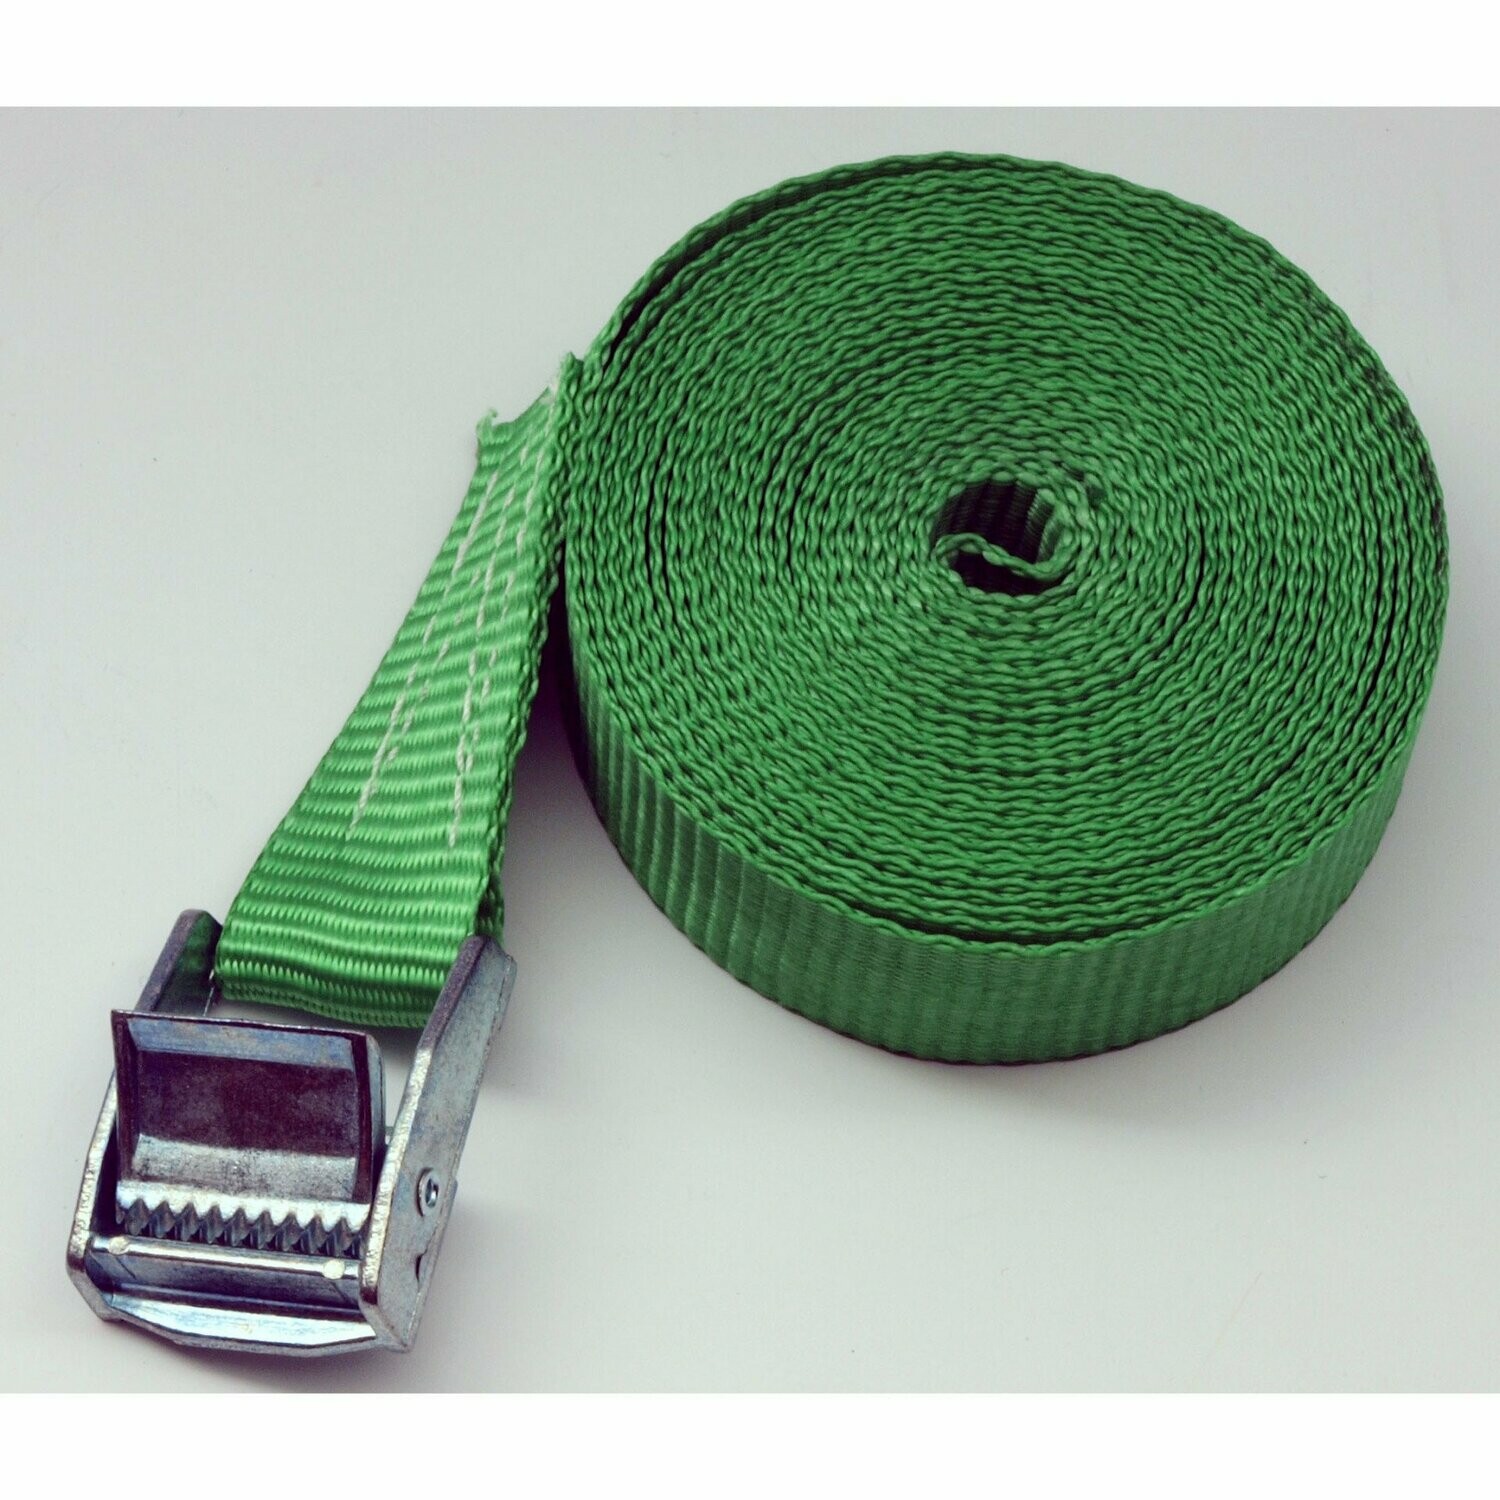 Lashing Strap with turnbuckle